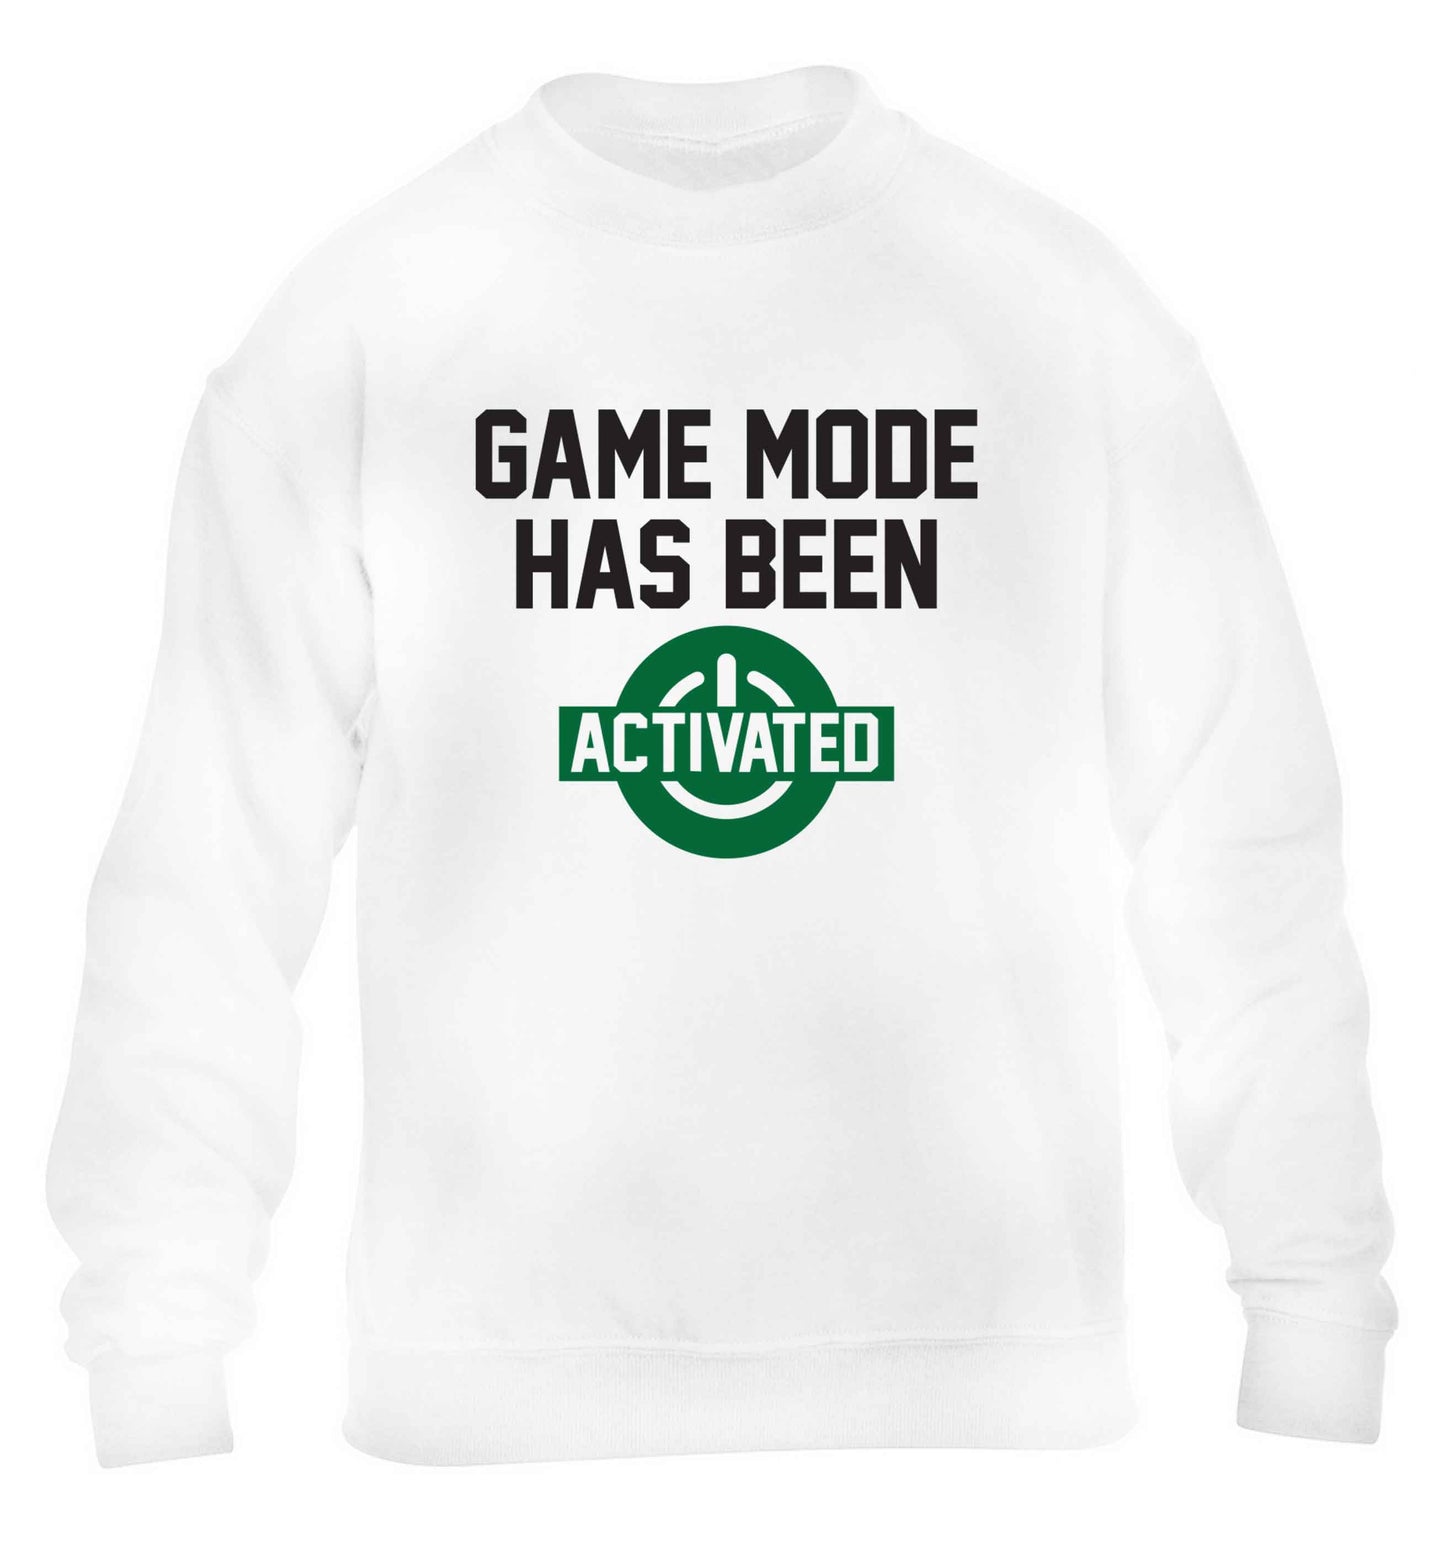 Game mode has been activated children's white sweater 12-13 Years